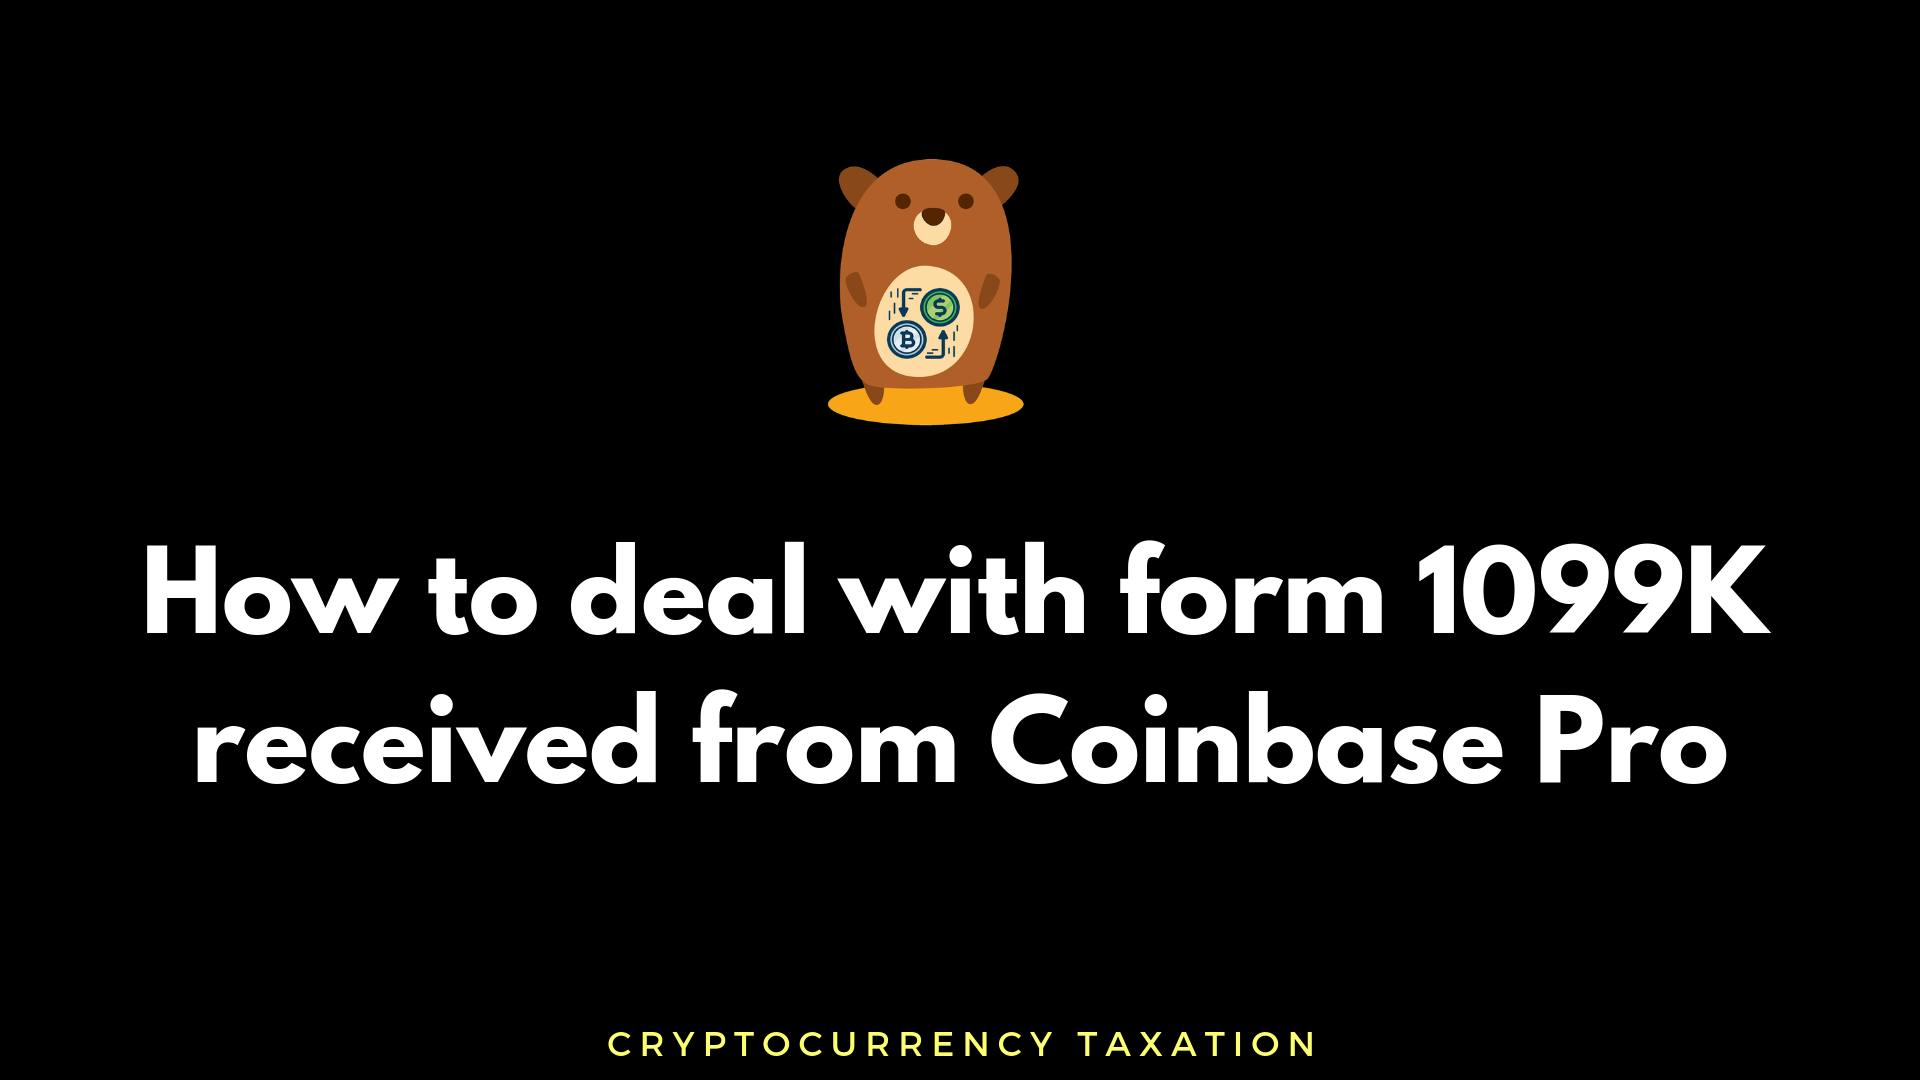 featured image - Received 1099K from Coinbase Pro? Here’s how to deal with it.